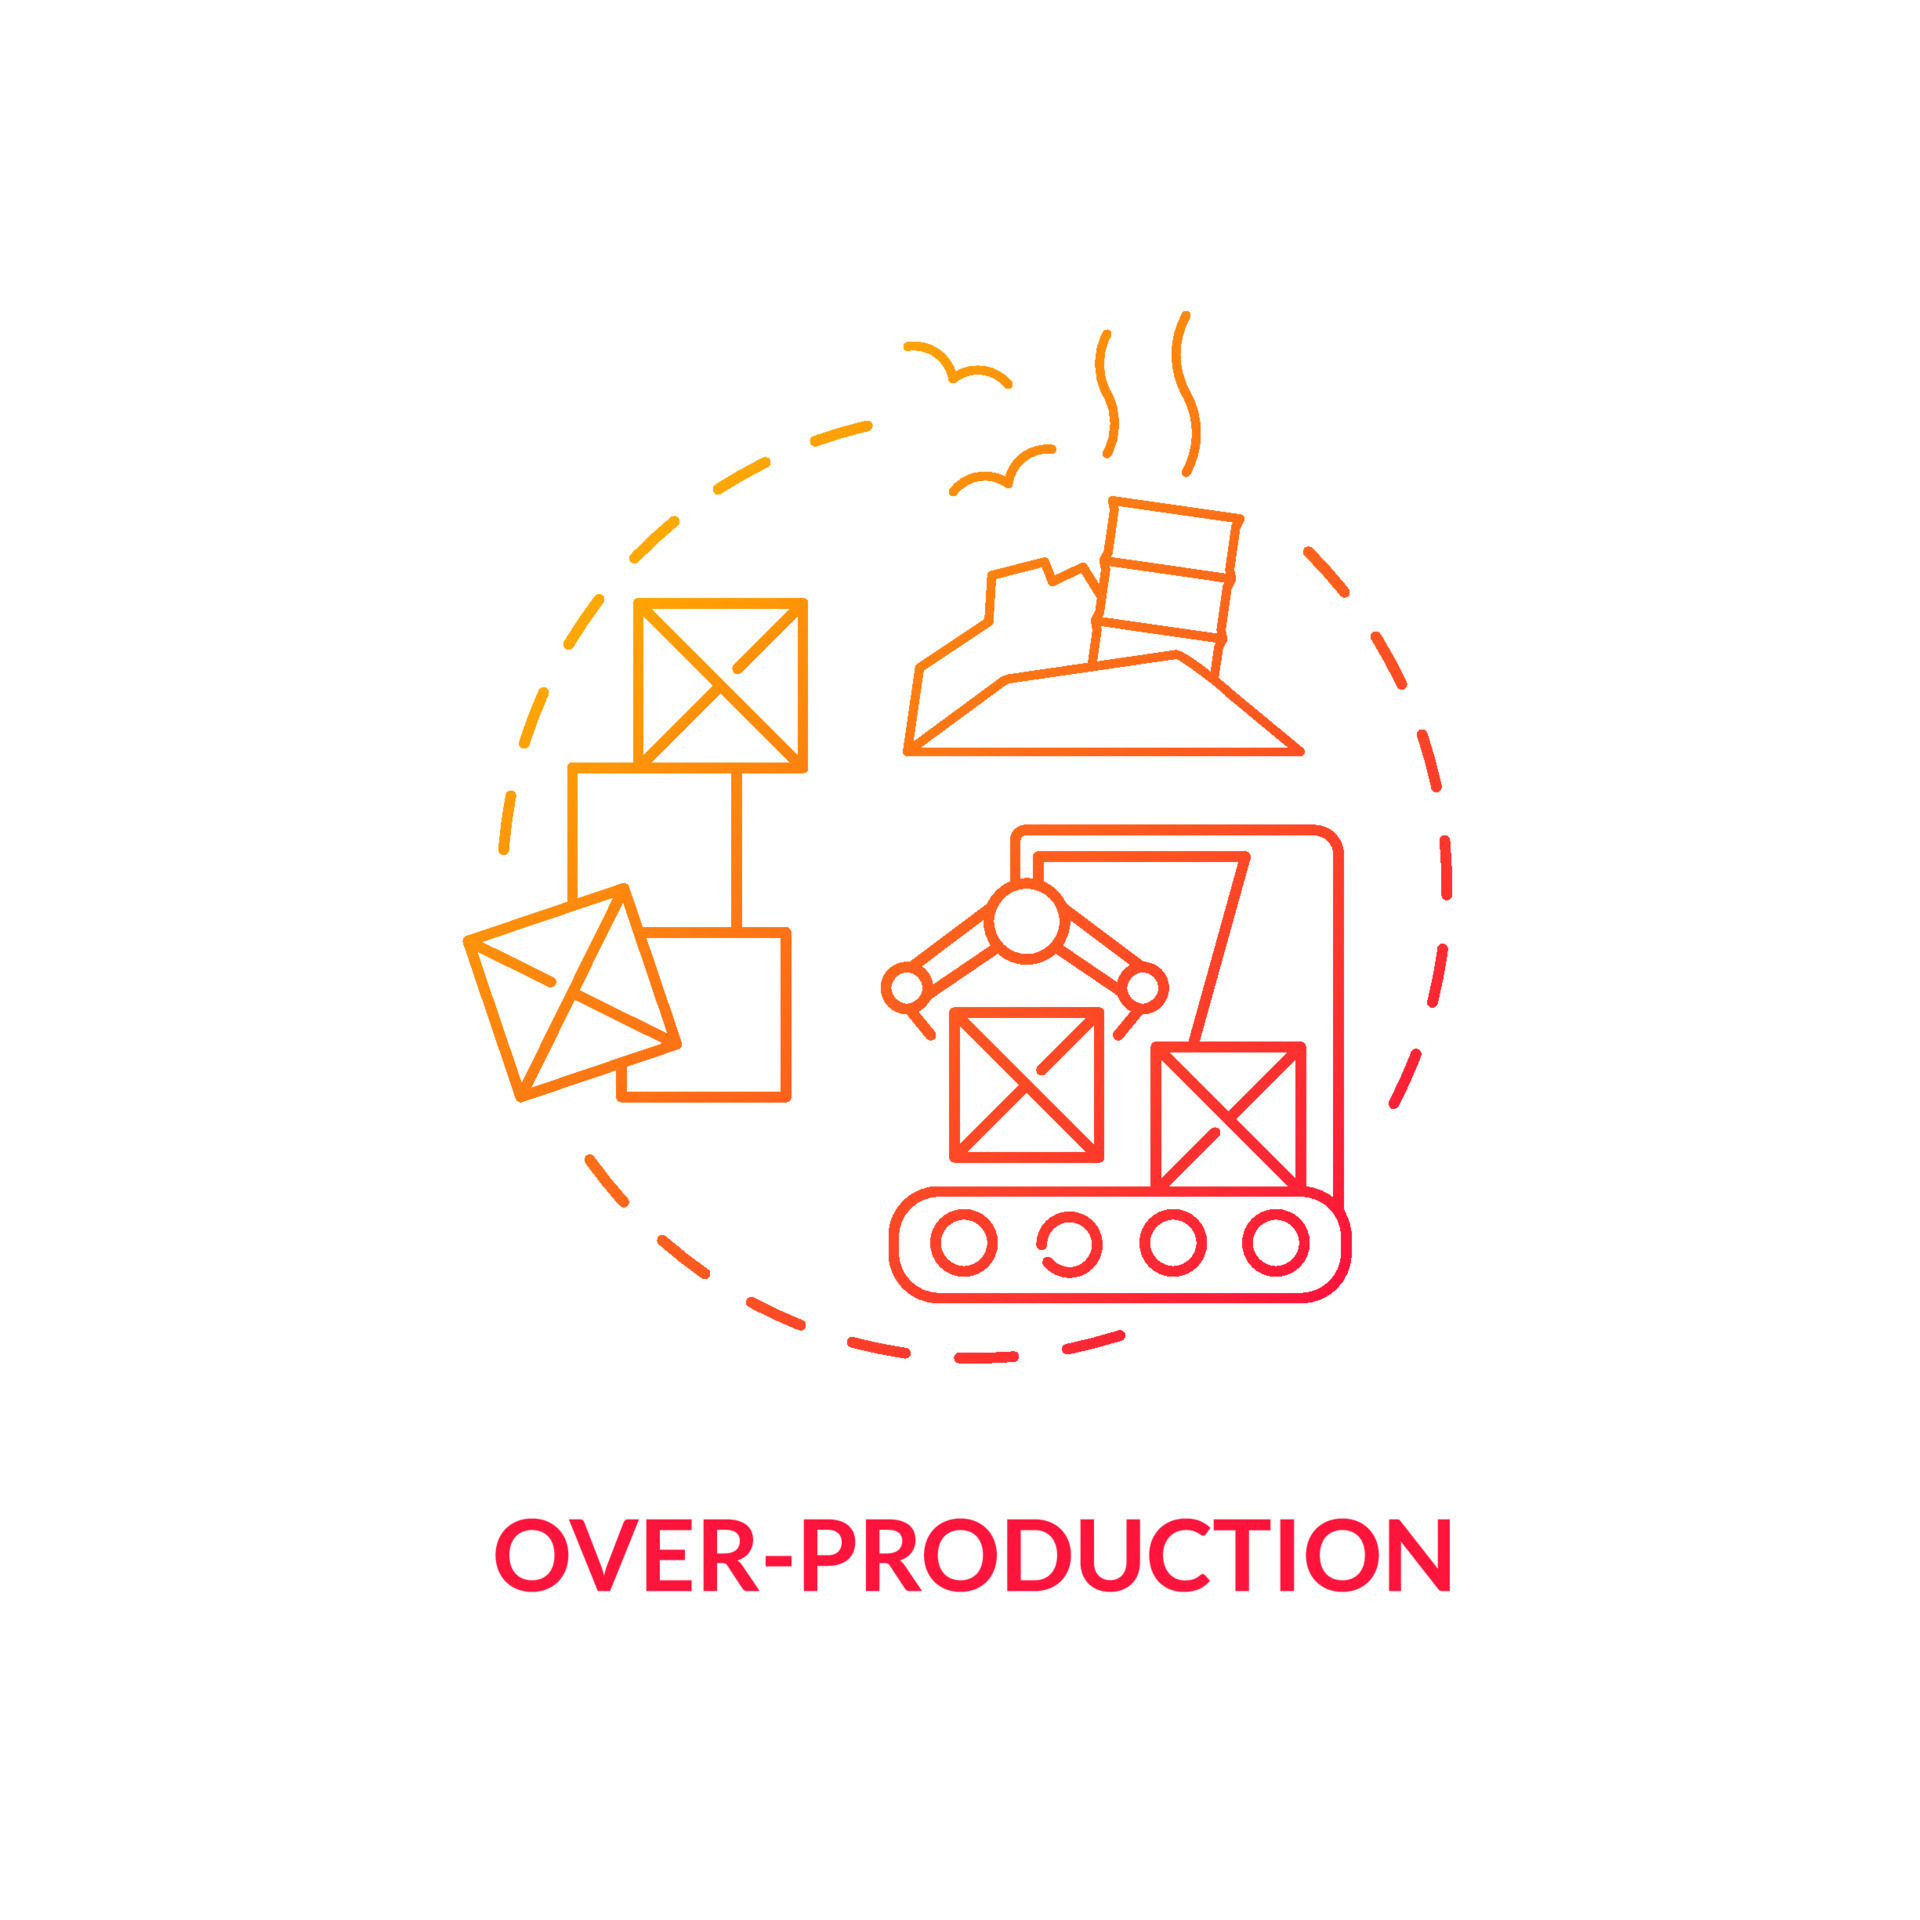 Overproduction red gradient concept icon. Excessive goods manufacturing